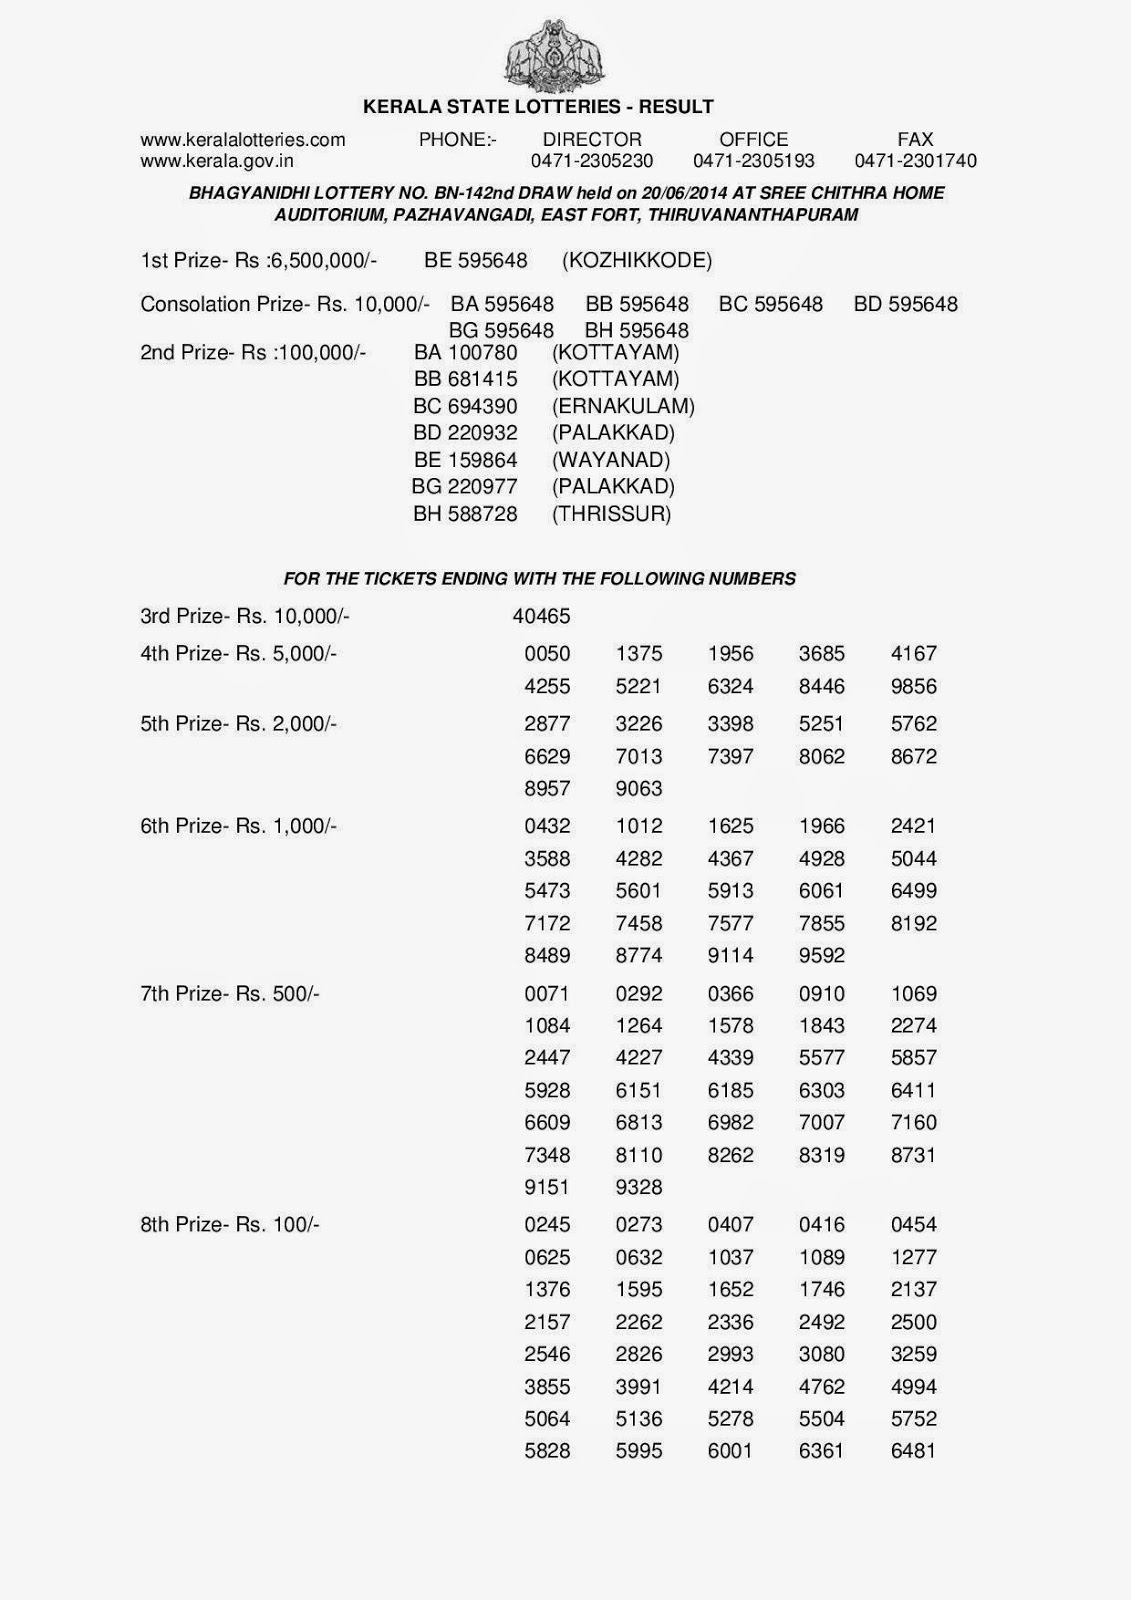 Kerala-Lotteries-20-6-2014-BHAGYANIDHI-Lottery-Results-BN ...